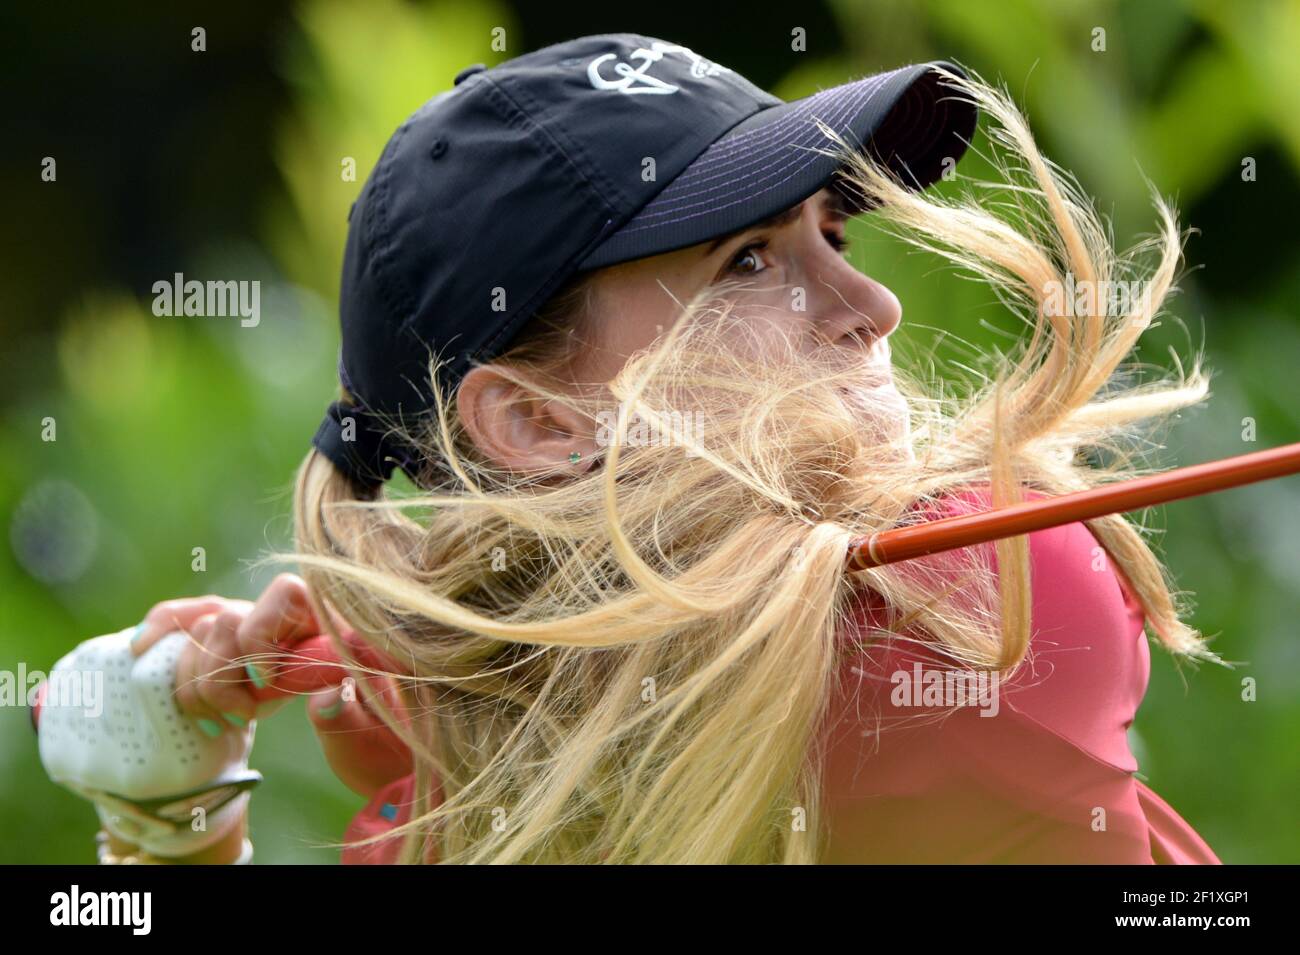 Golf - The Evian Championship 2013 - Evian - France - 9 -15/09/2013 - Photo Philippe Millereau / KMSP / DPPI - 10/09/2013 - Day 2 - Practice round - Belen Mozo / Esp Stock Photo